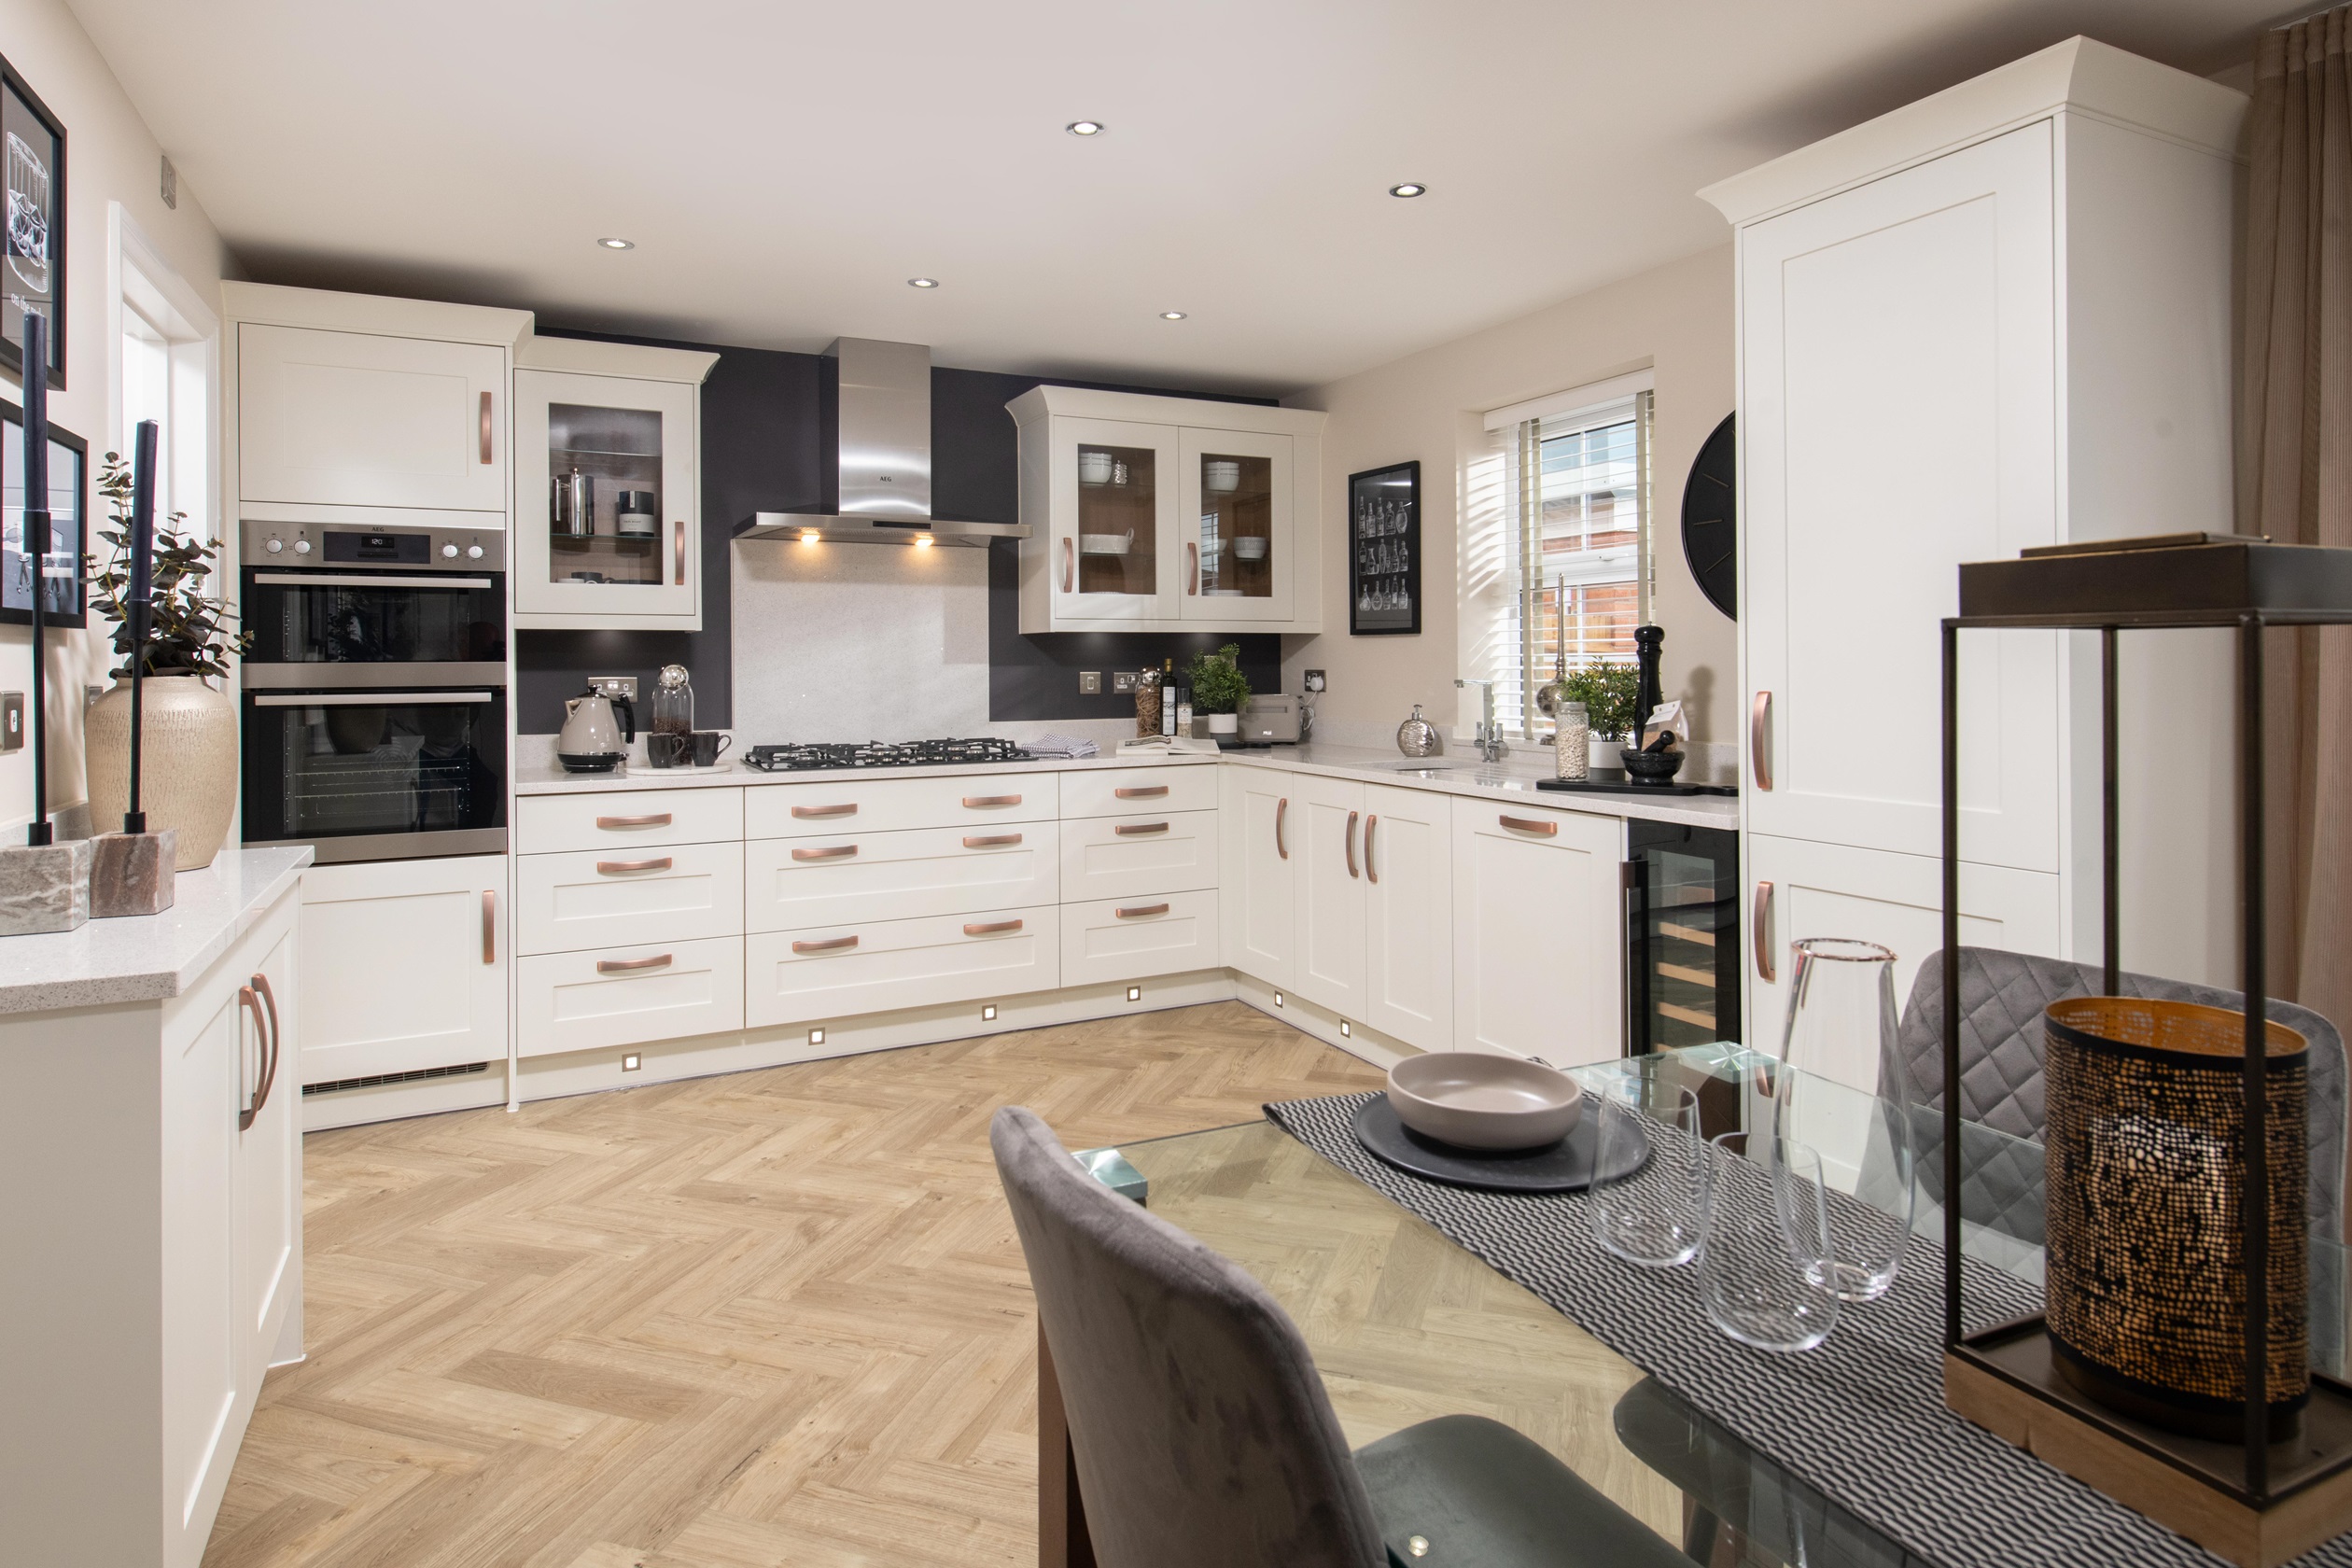 Property 2 of 10. The Hawthorns Chelworth Kitchen 3